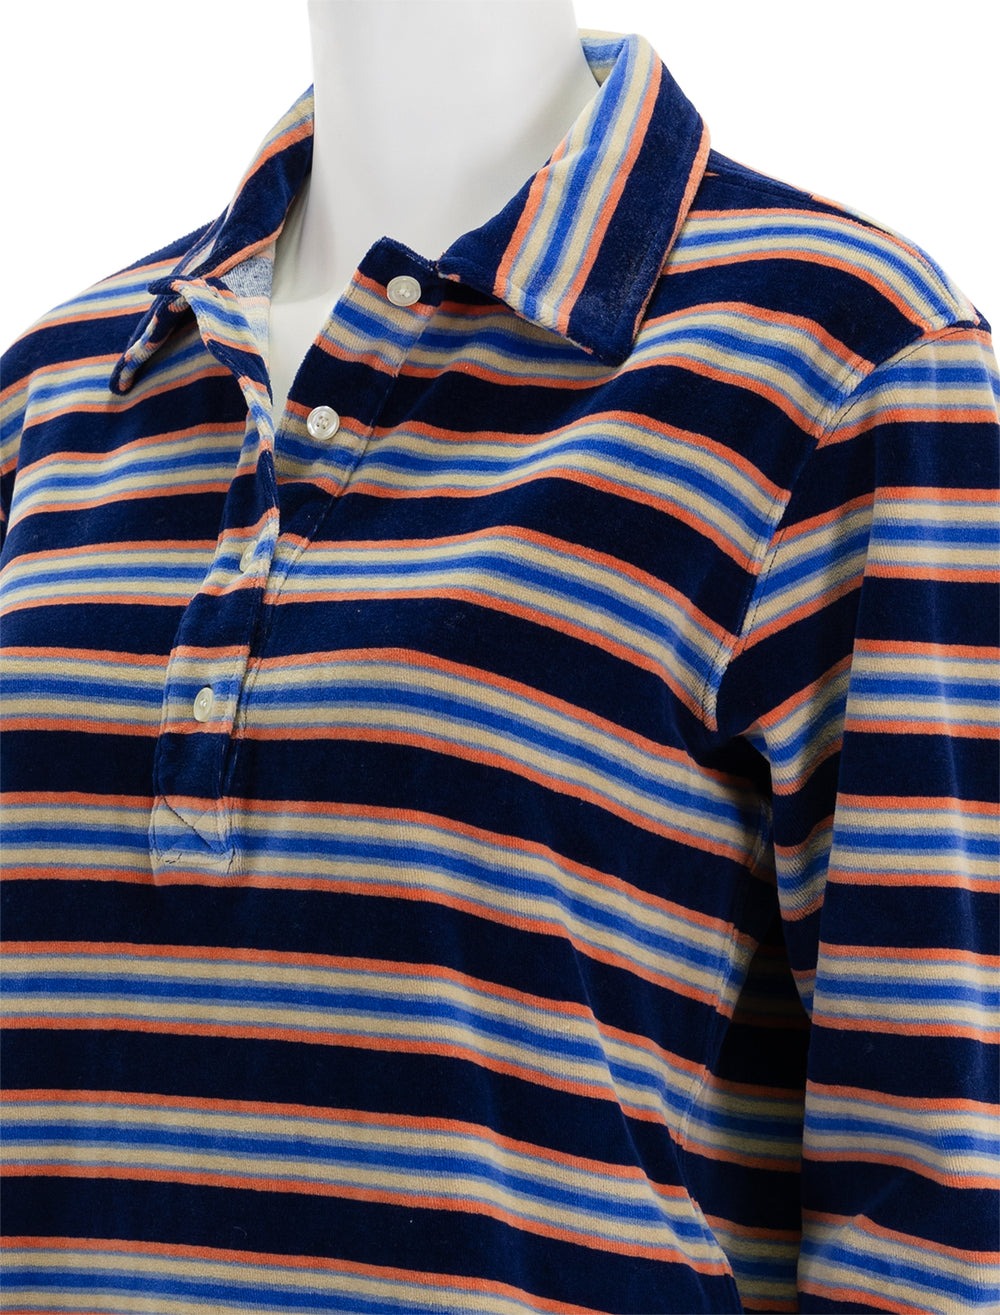 Close-up view of The Great's Rugby Sweatshirt in Scrimmage Stripe.